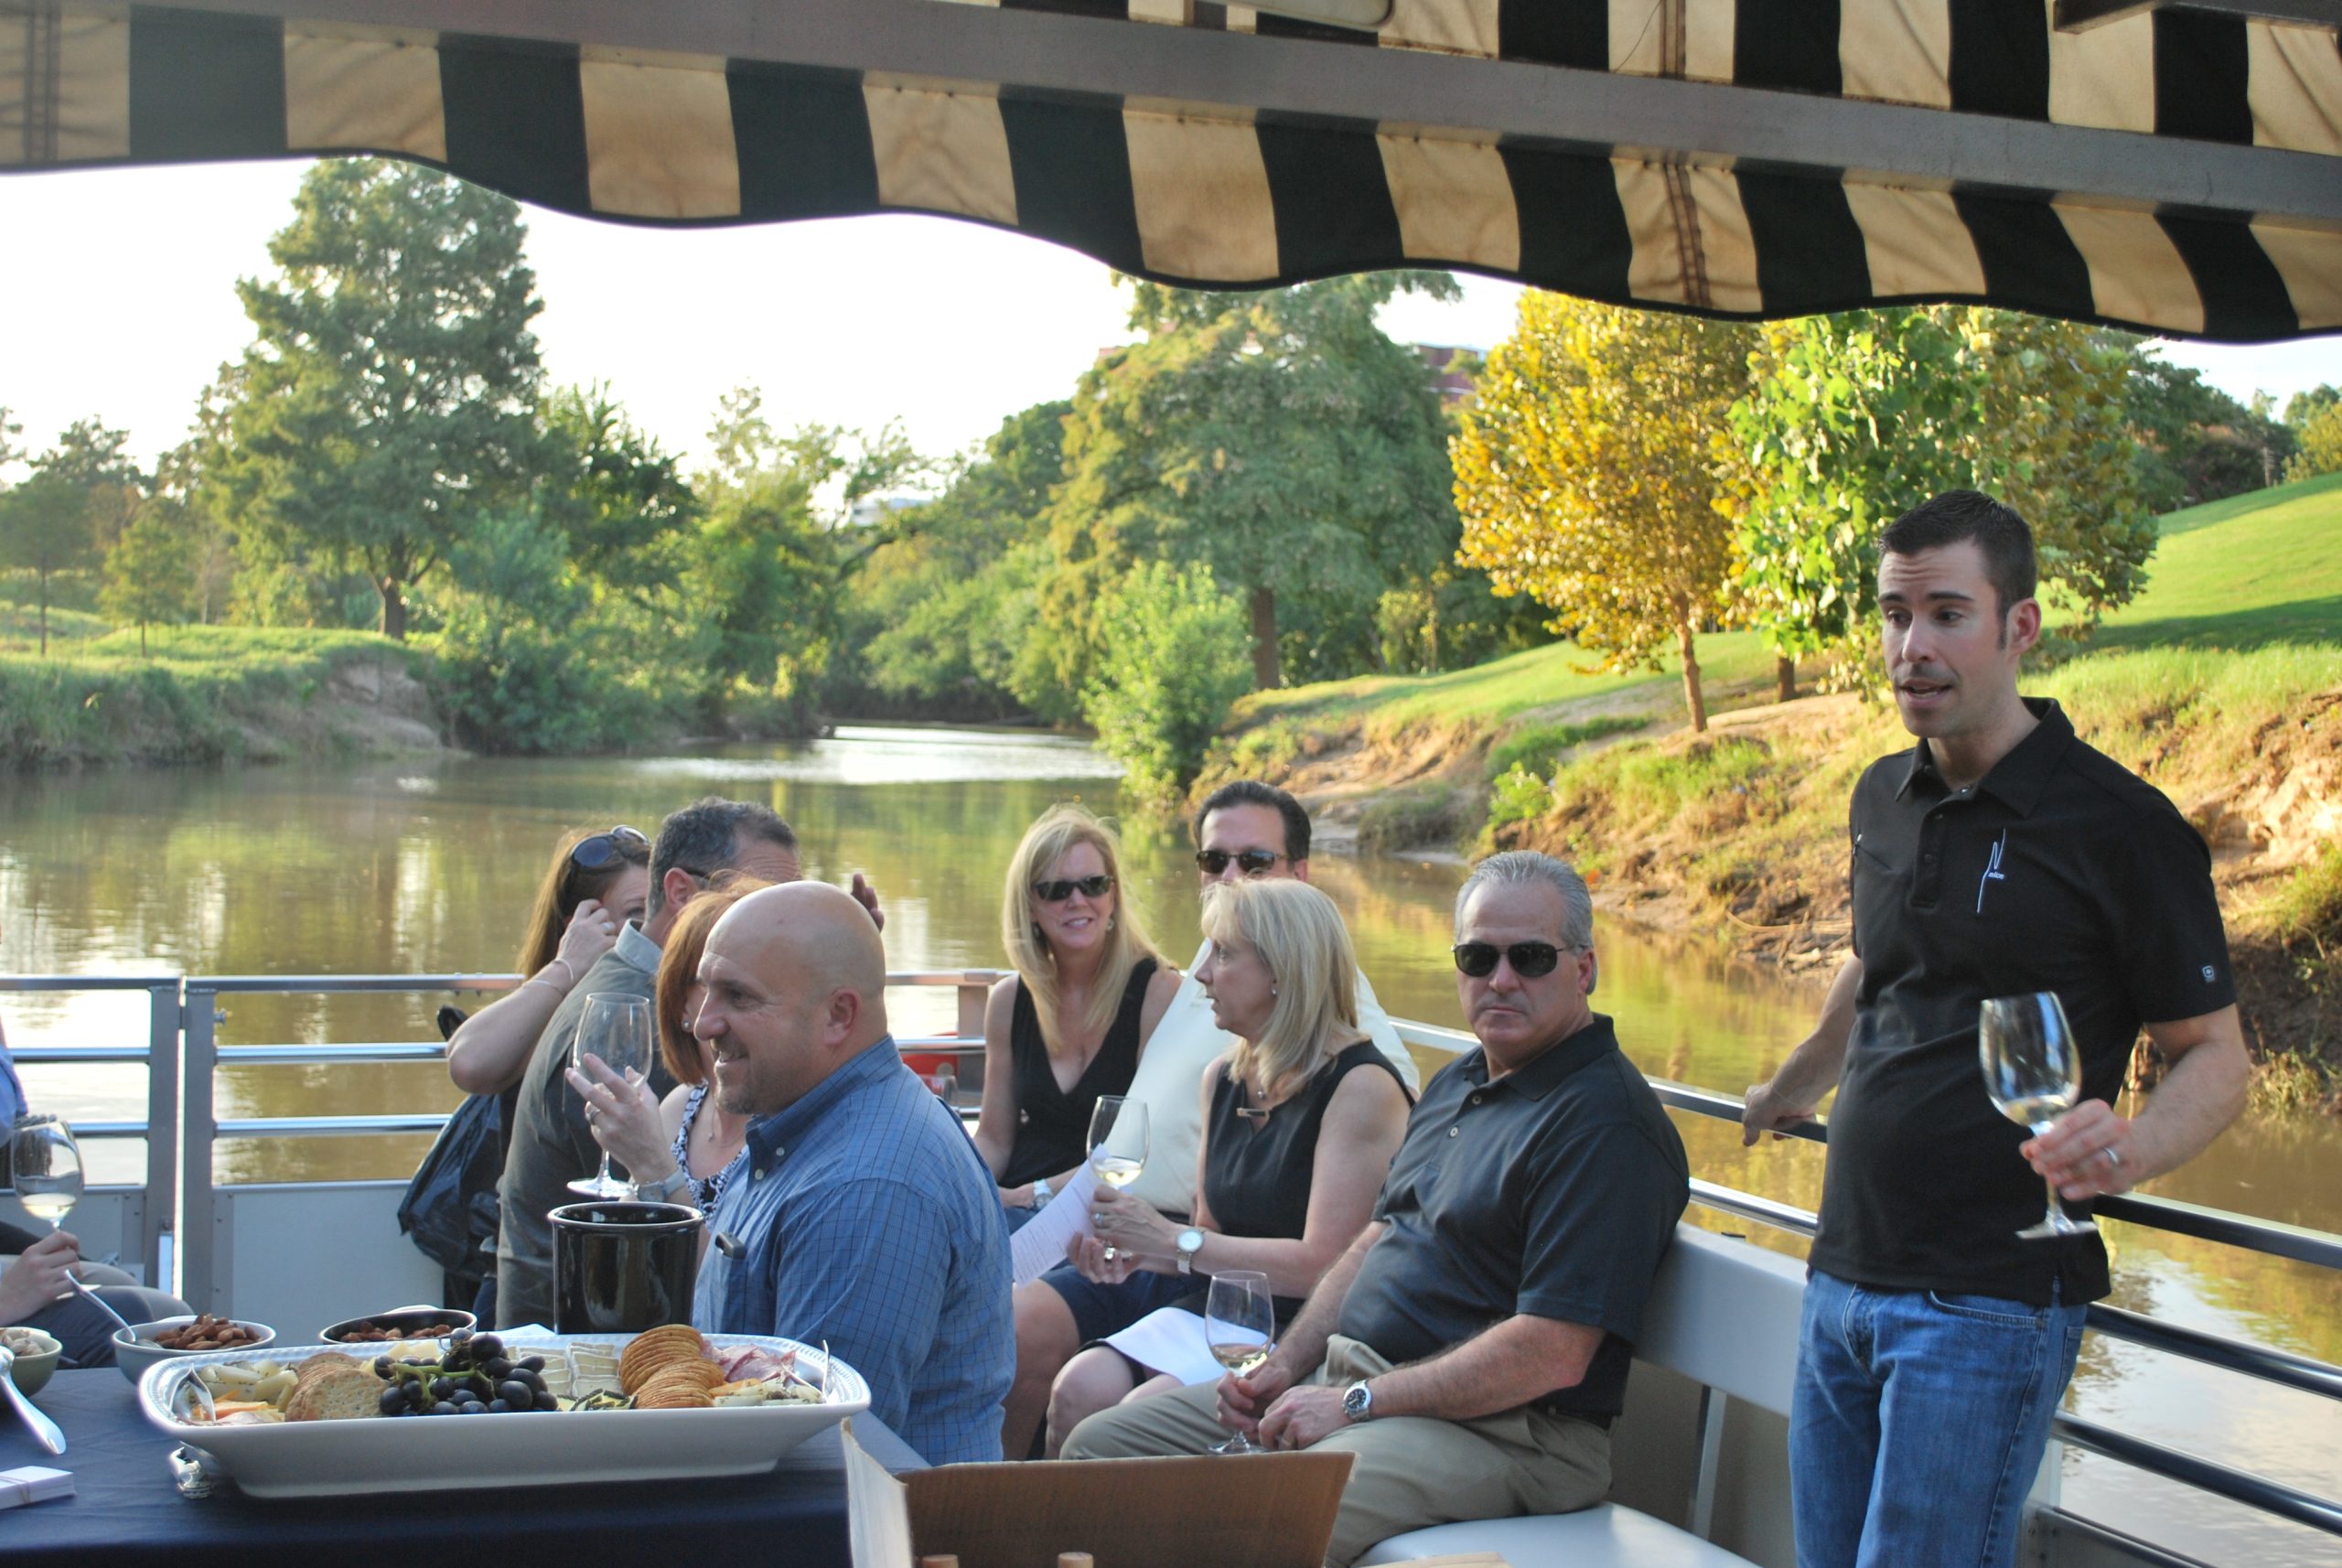 Image SOLD OUT - Foodie Float: Wine Tasting with Nice Winery